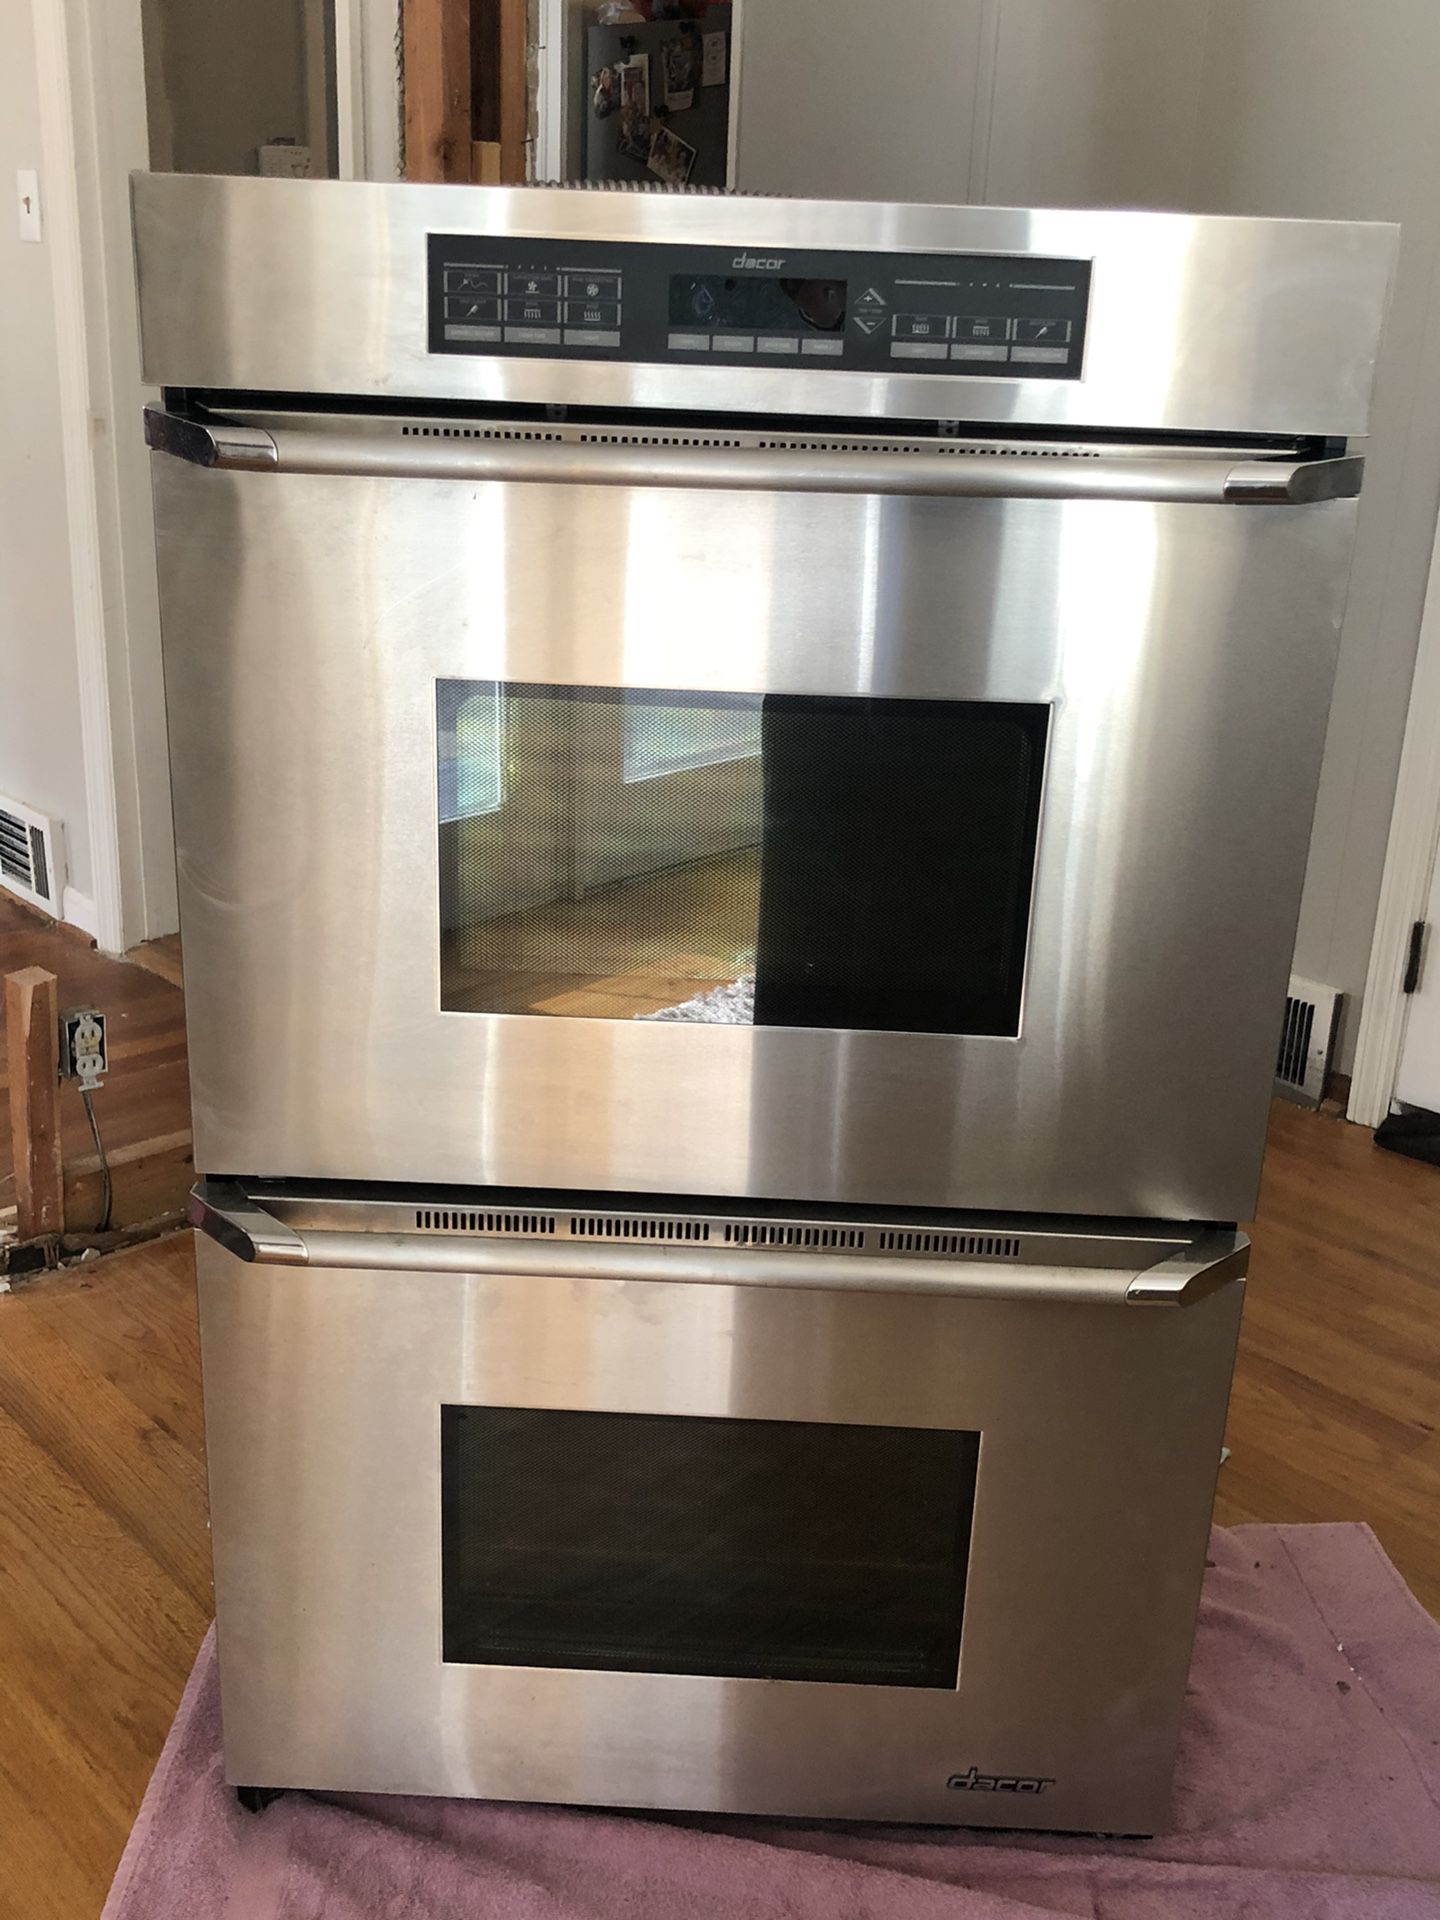 Dacor 27” SS double oven including warmer